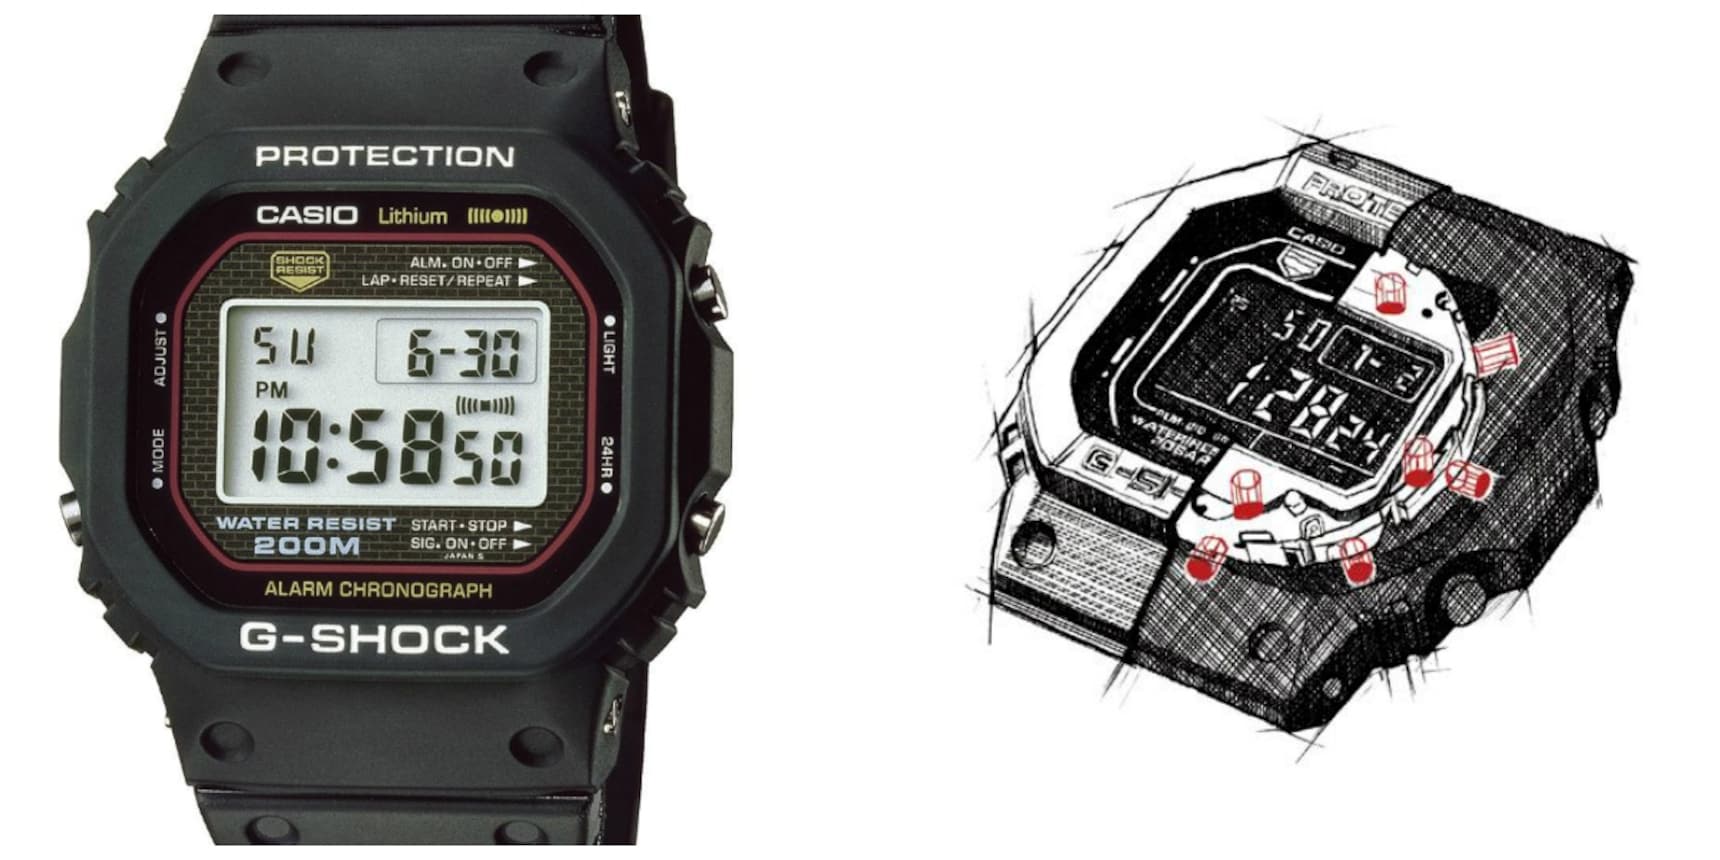 The Origins of the Tough G-SHOCK Watch